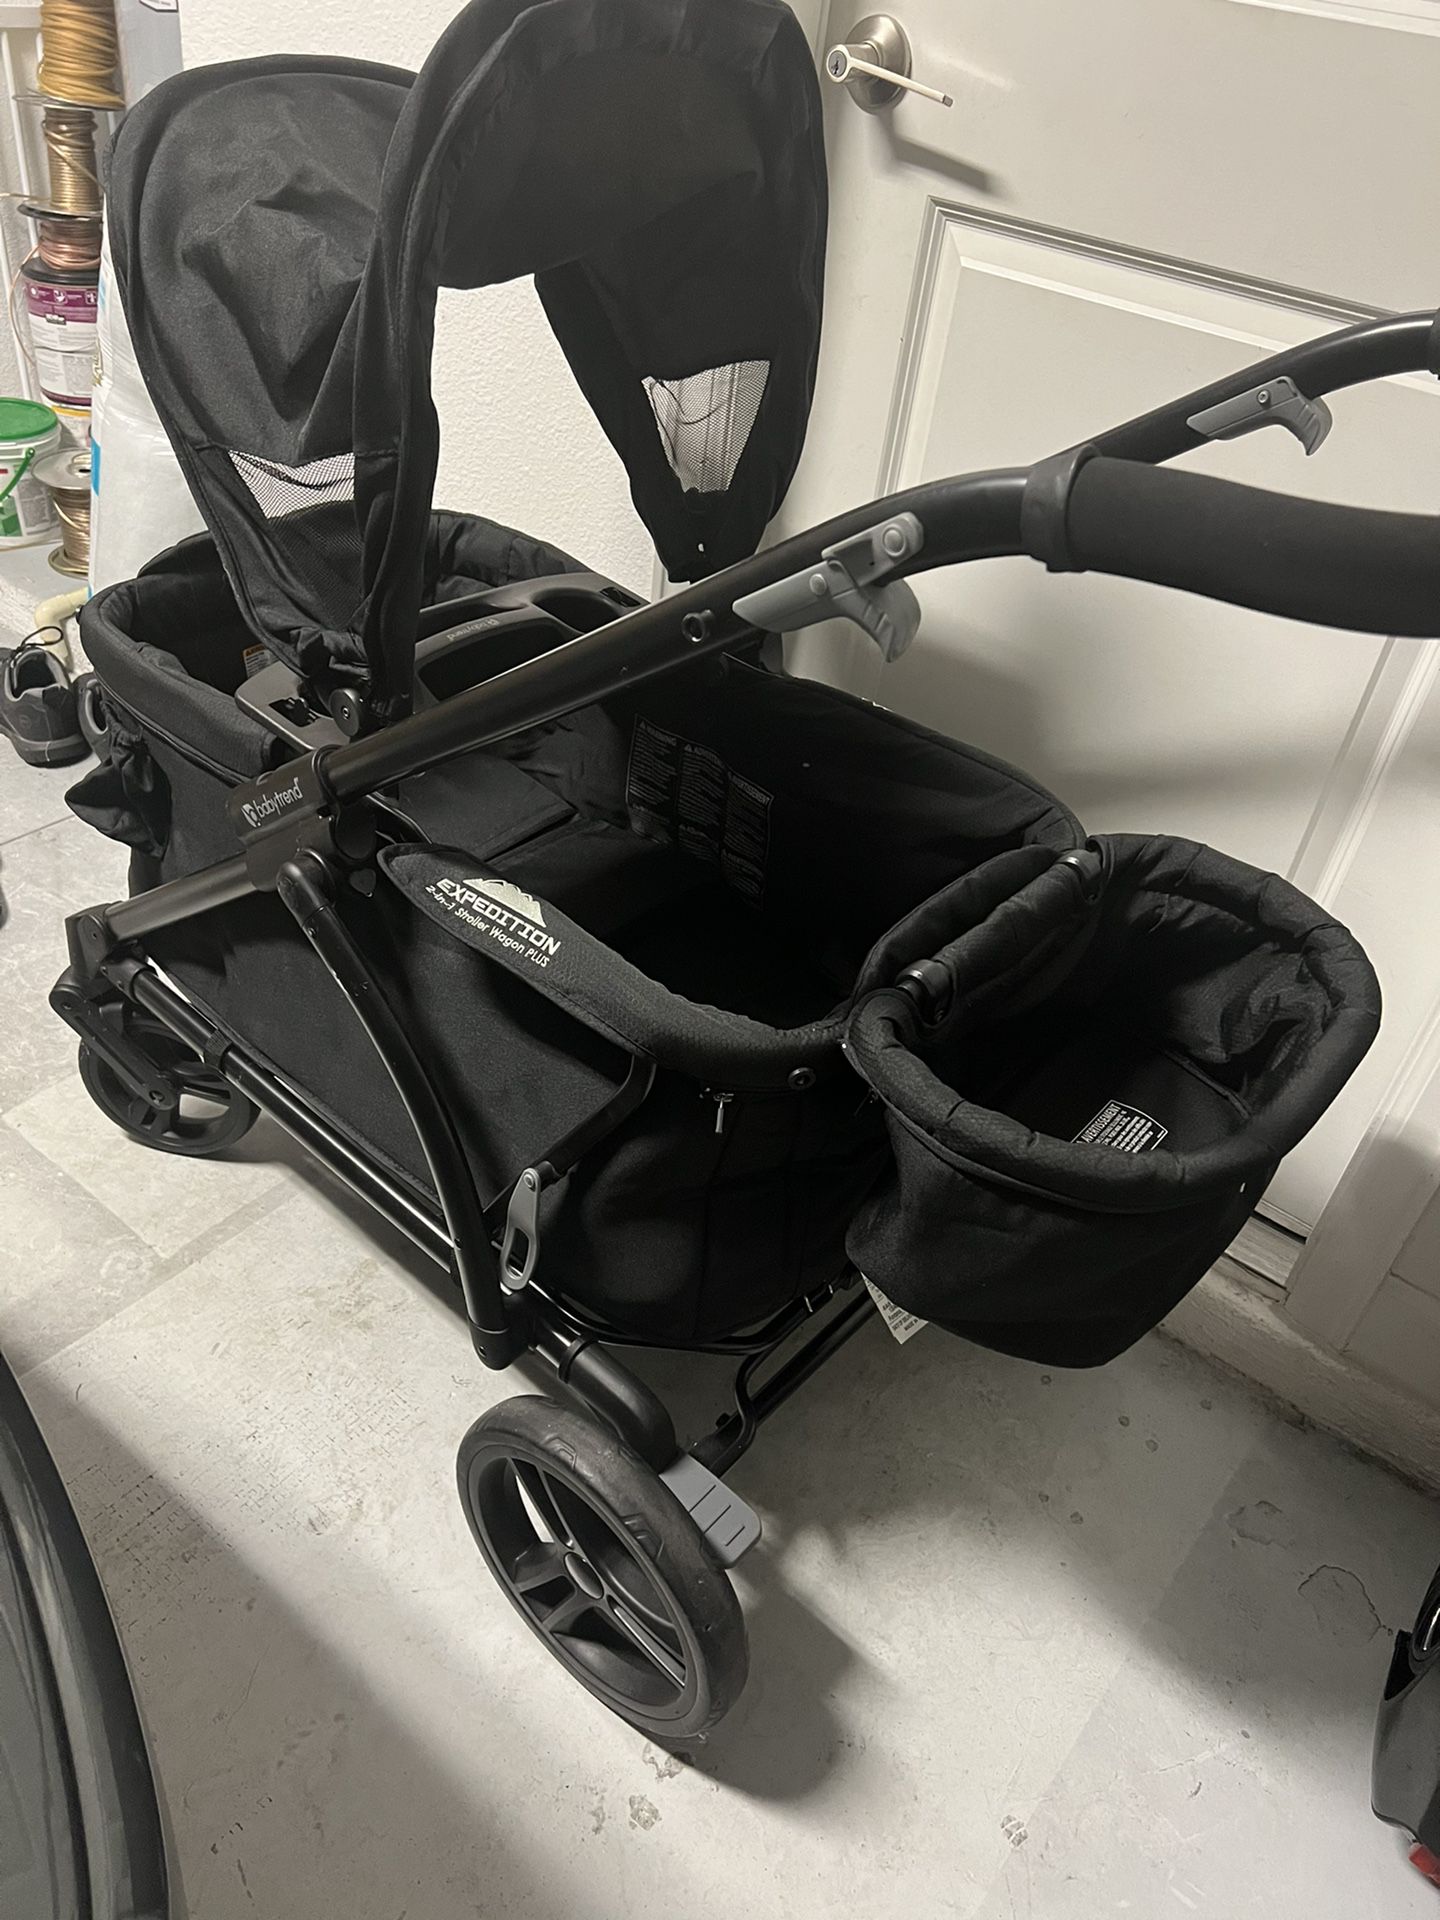 Double Stroller/ Baby Wagon 